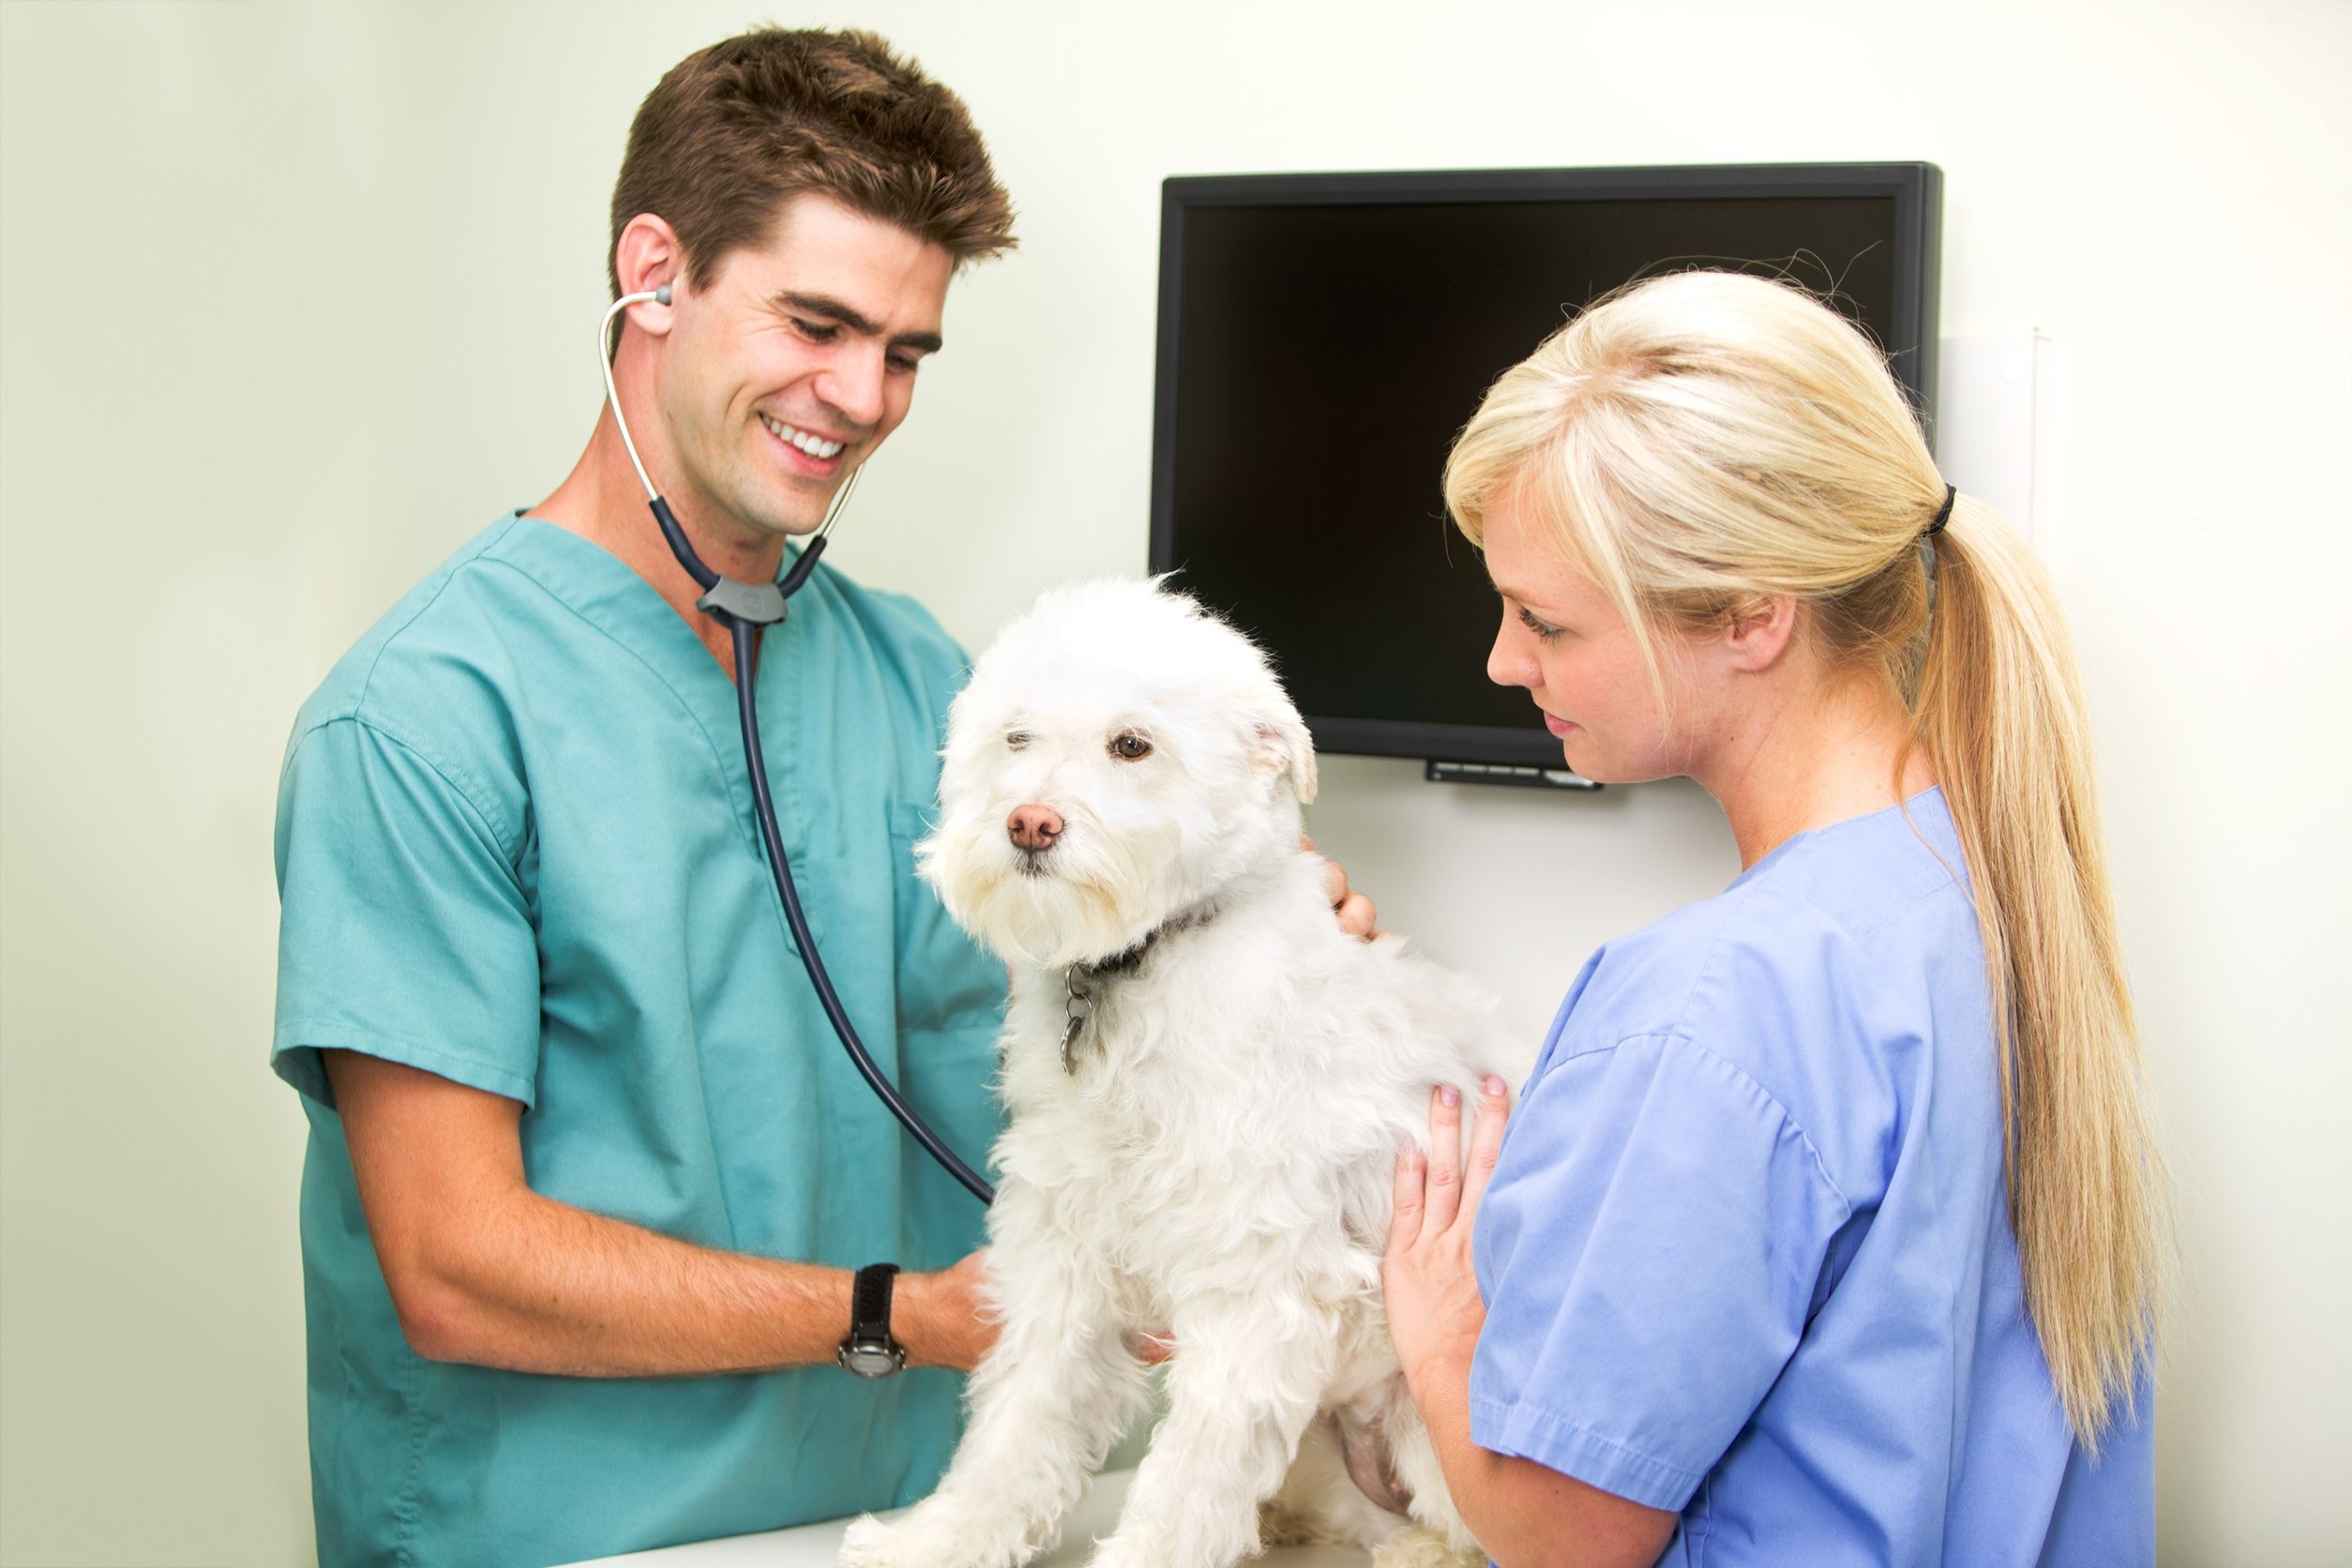 A Reputable Veterinary Hospital in Gulfport, MS Can Help with All of Your Furry Family Members